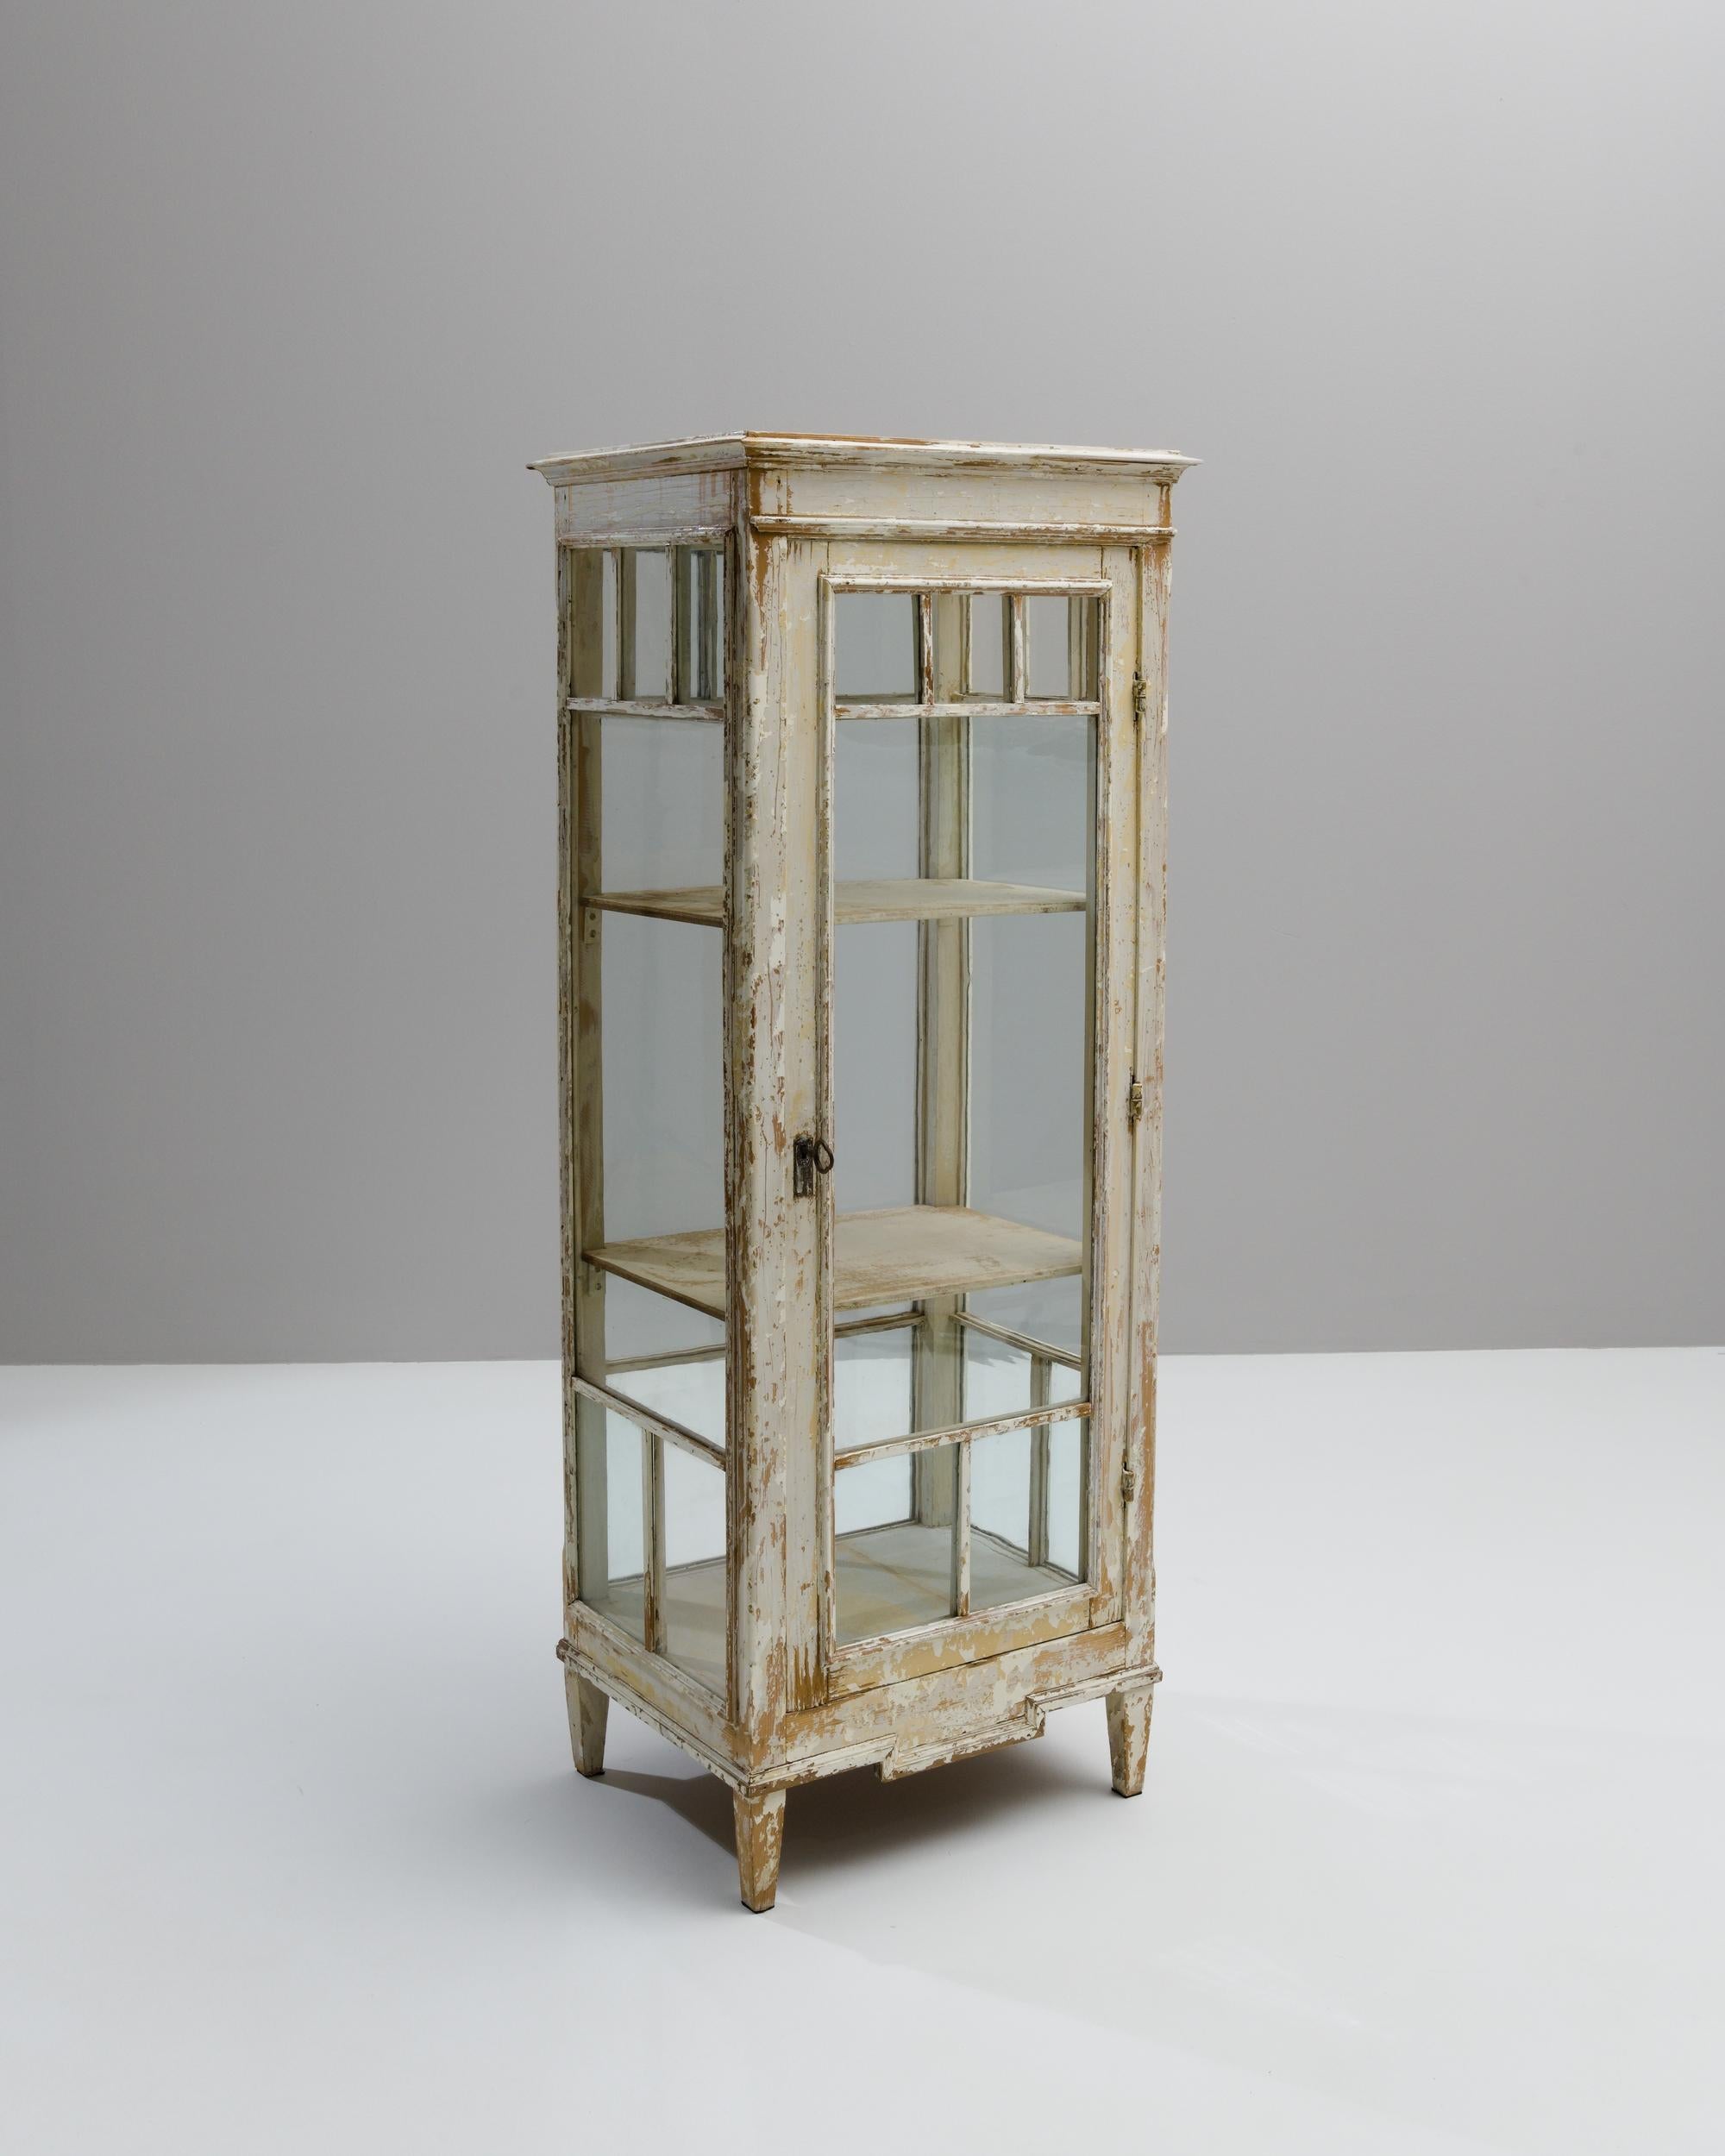 A wooden vitrine created in 1900s France. A sleek design, weathered and matured by time, this lovely vitrine combines a stylistic beauty with a compelling sense of history. Through time, a dramatic patina has grown across its surface. As the paint